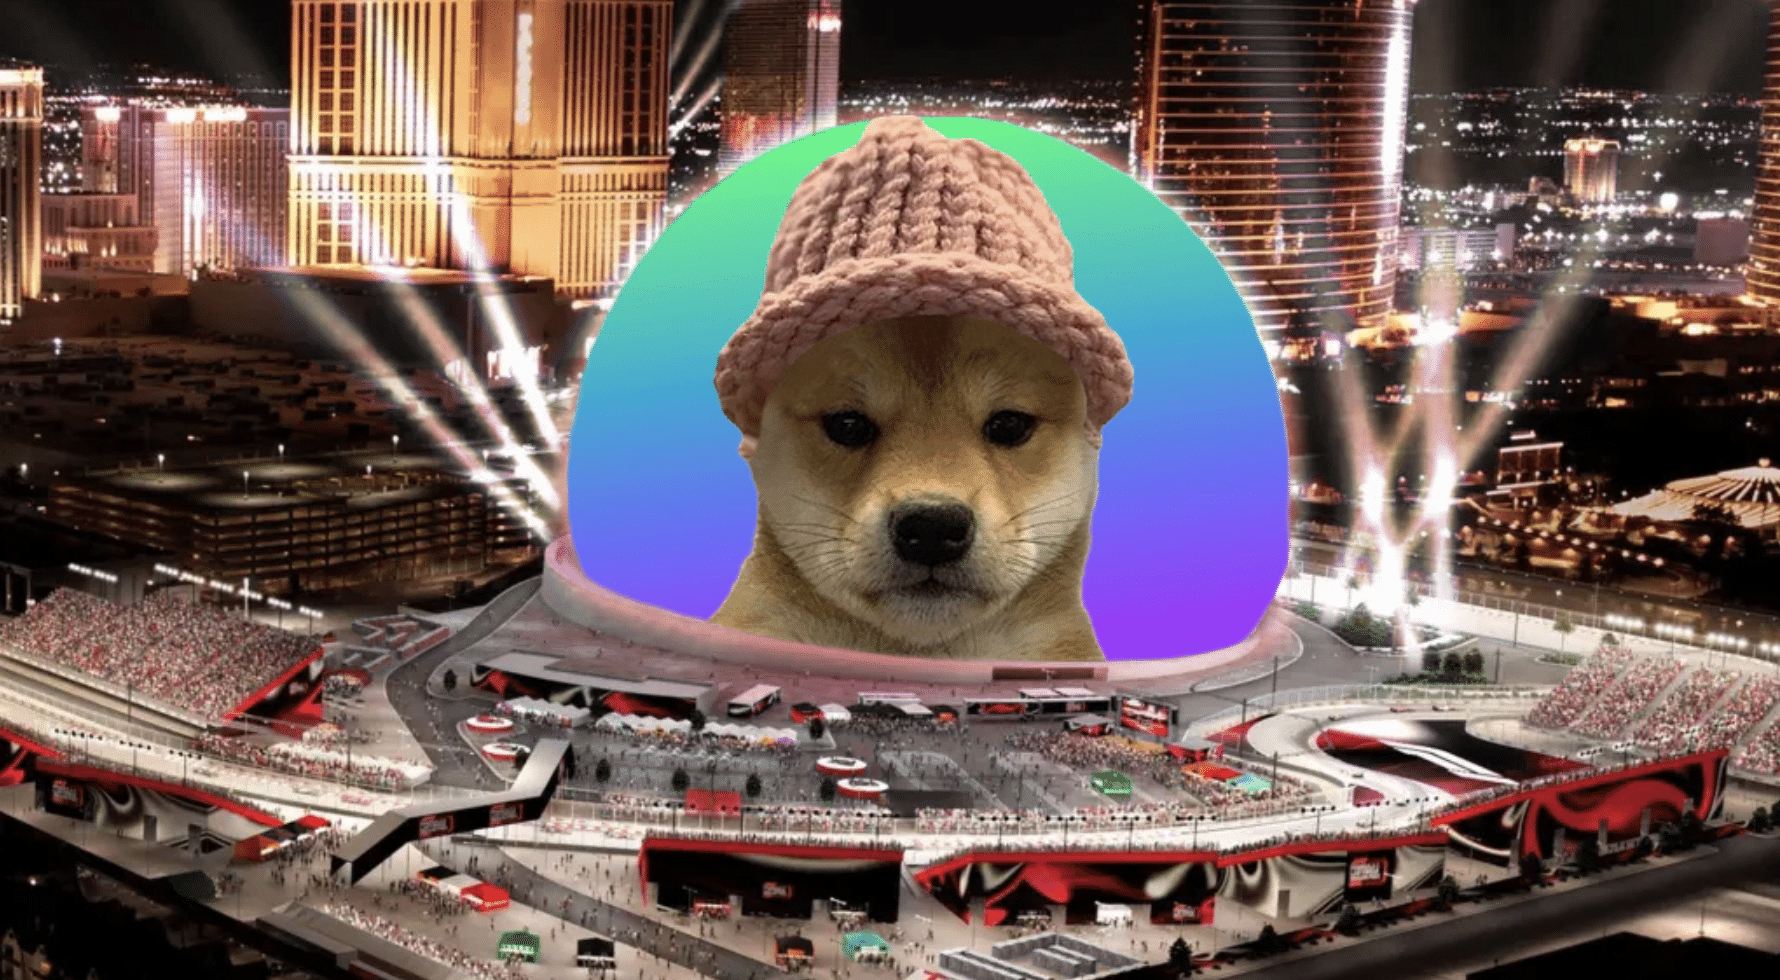 An edited picture with the Dogwifhat meme placed on the Las Vegas Sphere (https://wif-sphere.vercel.app/)